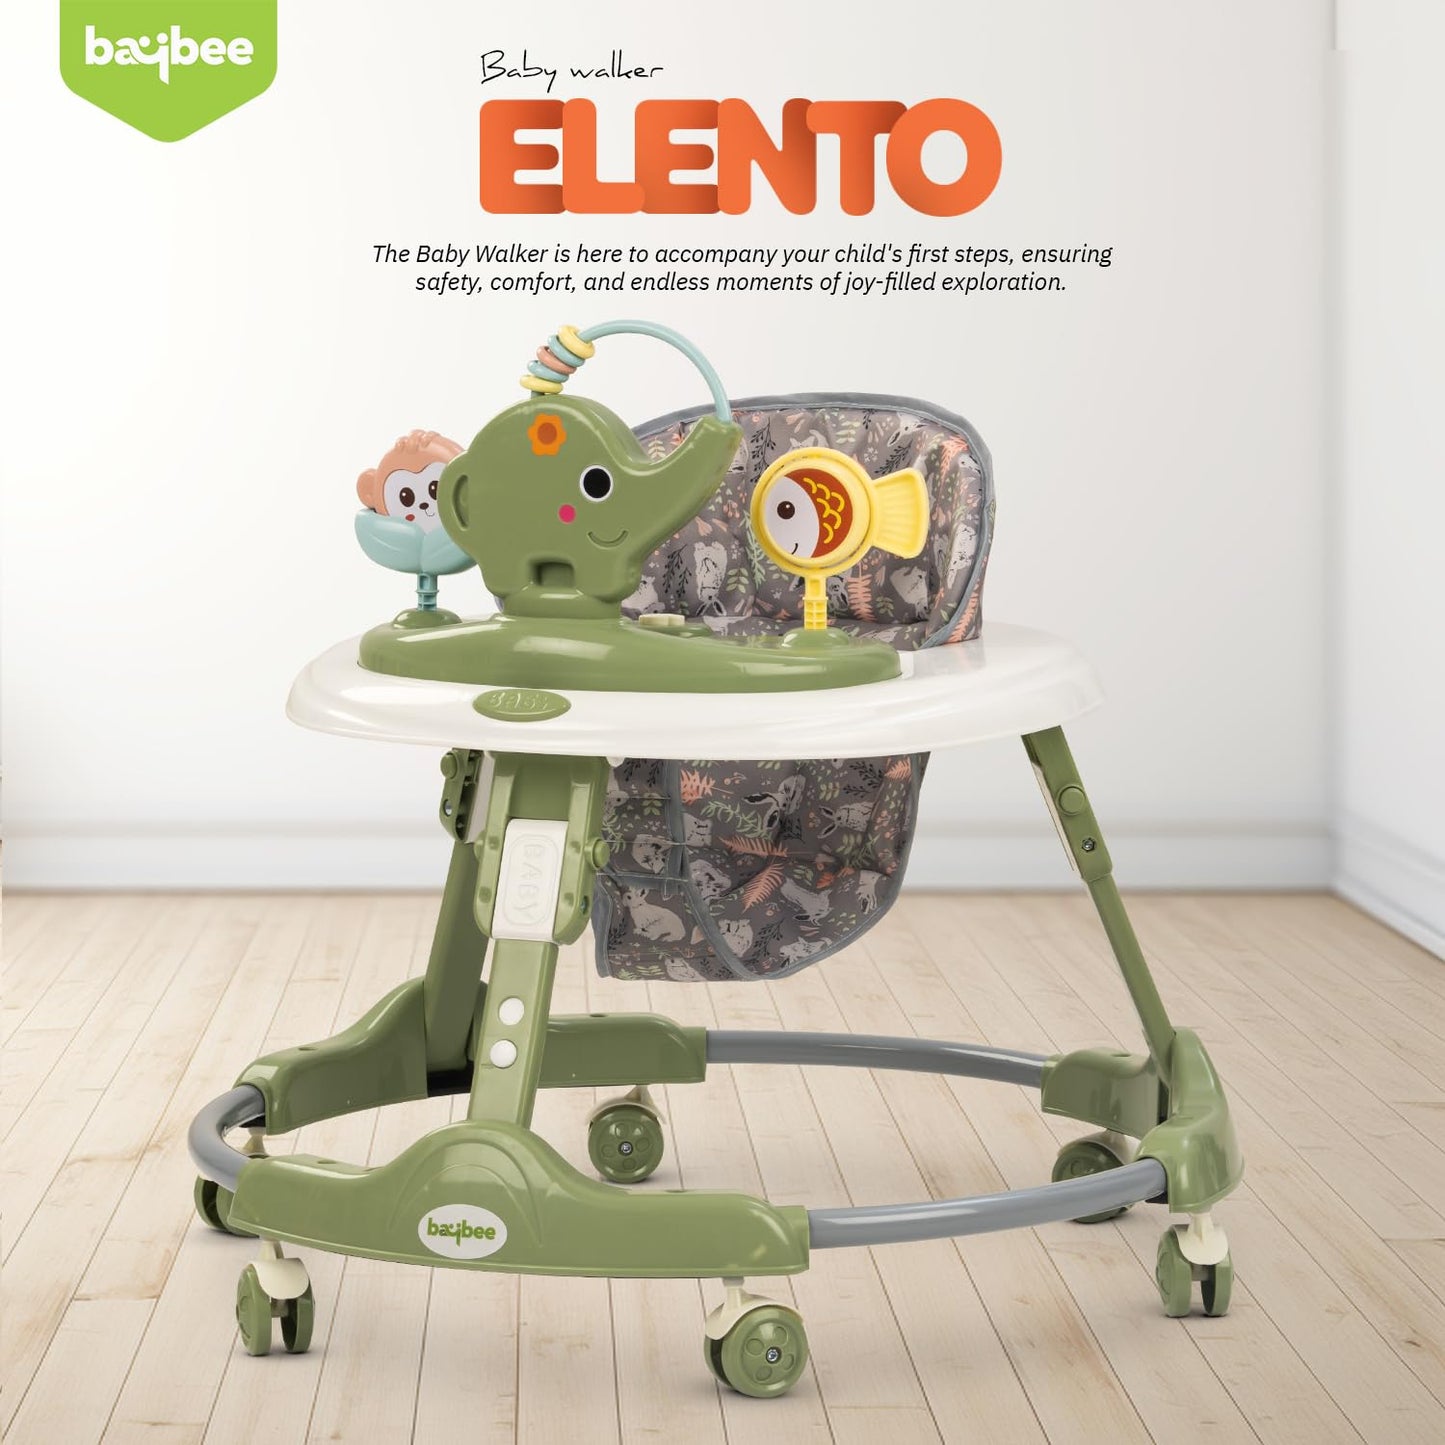 Baybee Elento Baby Walker for Kids, Foldable Round Kids Walker with 2 Height & 3 Seat Adjustable